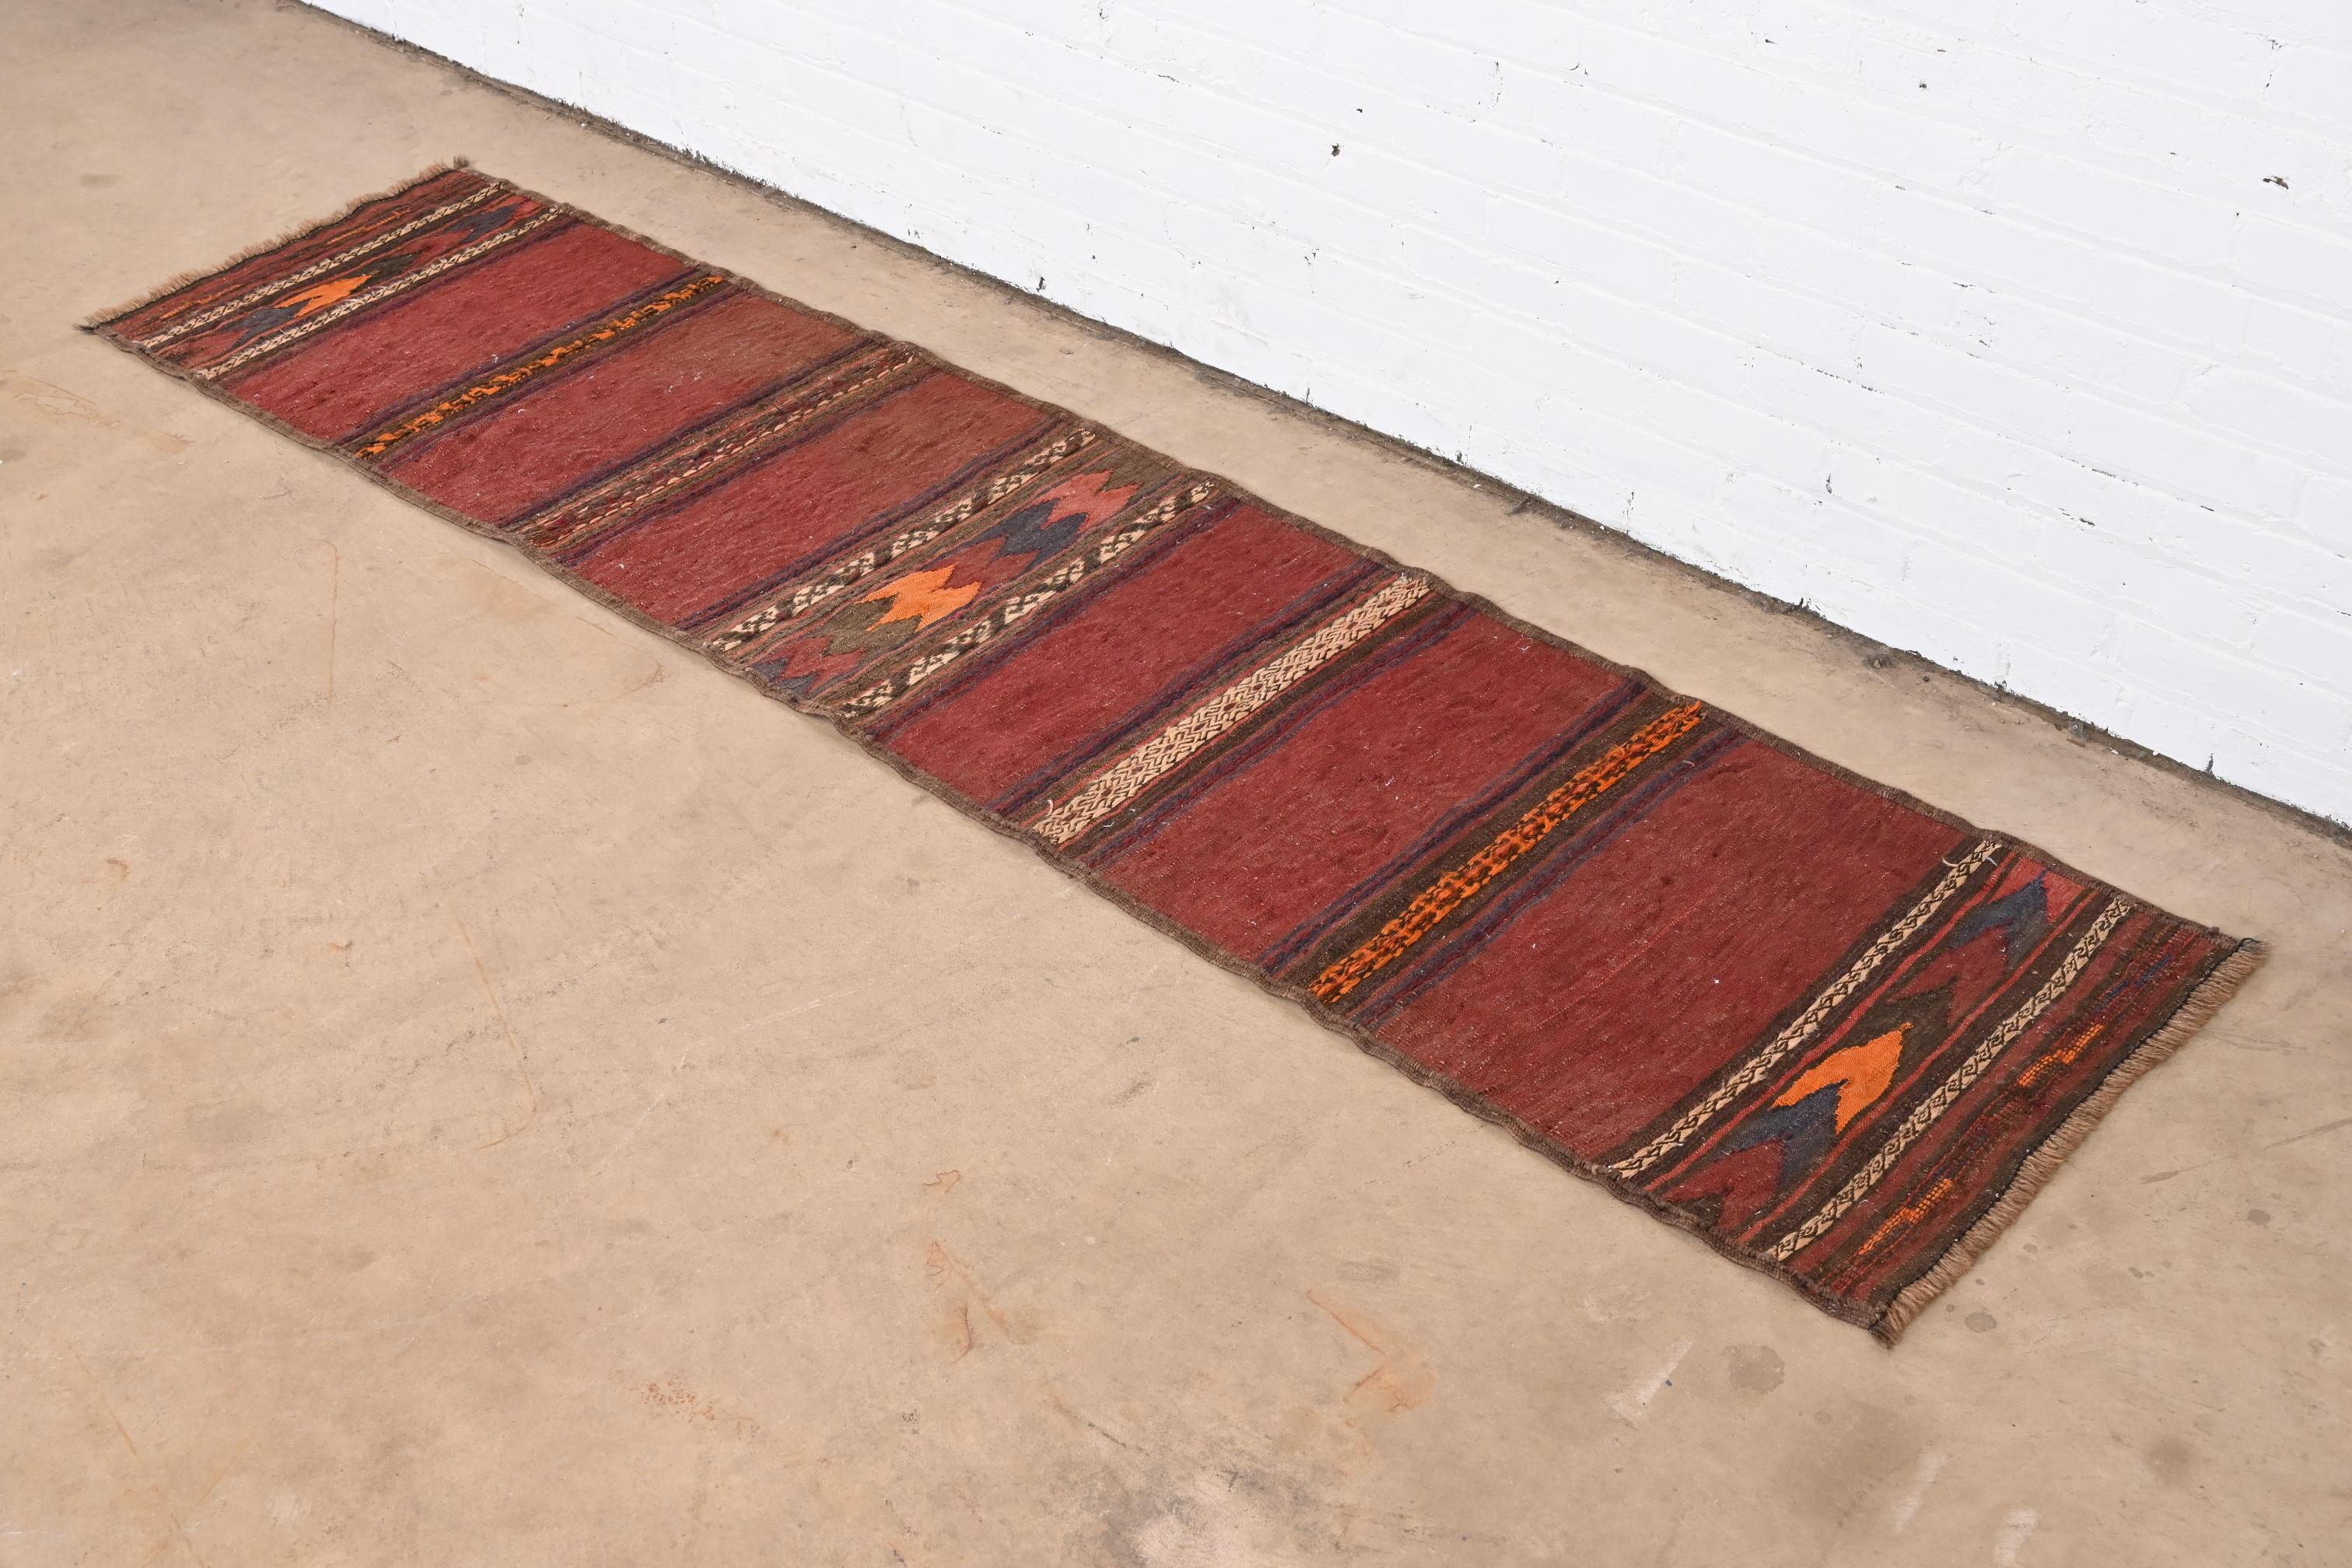 A gorgeous Mid-Century Modern hand-woven Afghan kilim flat weave runner rug

Mid-20th Century

Beautiful geometric design, with predominant colors in maroon, orange, blue, and brown.

Measures: 23